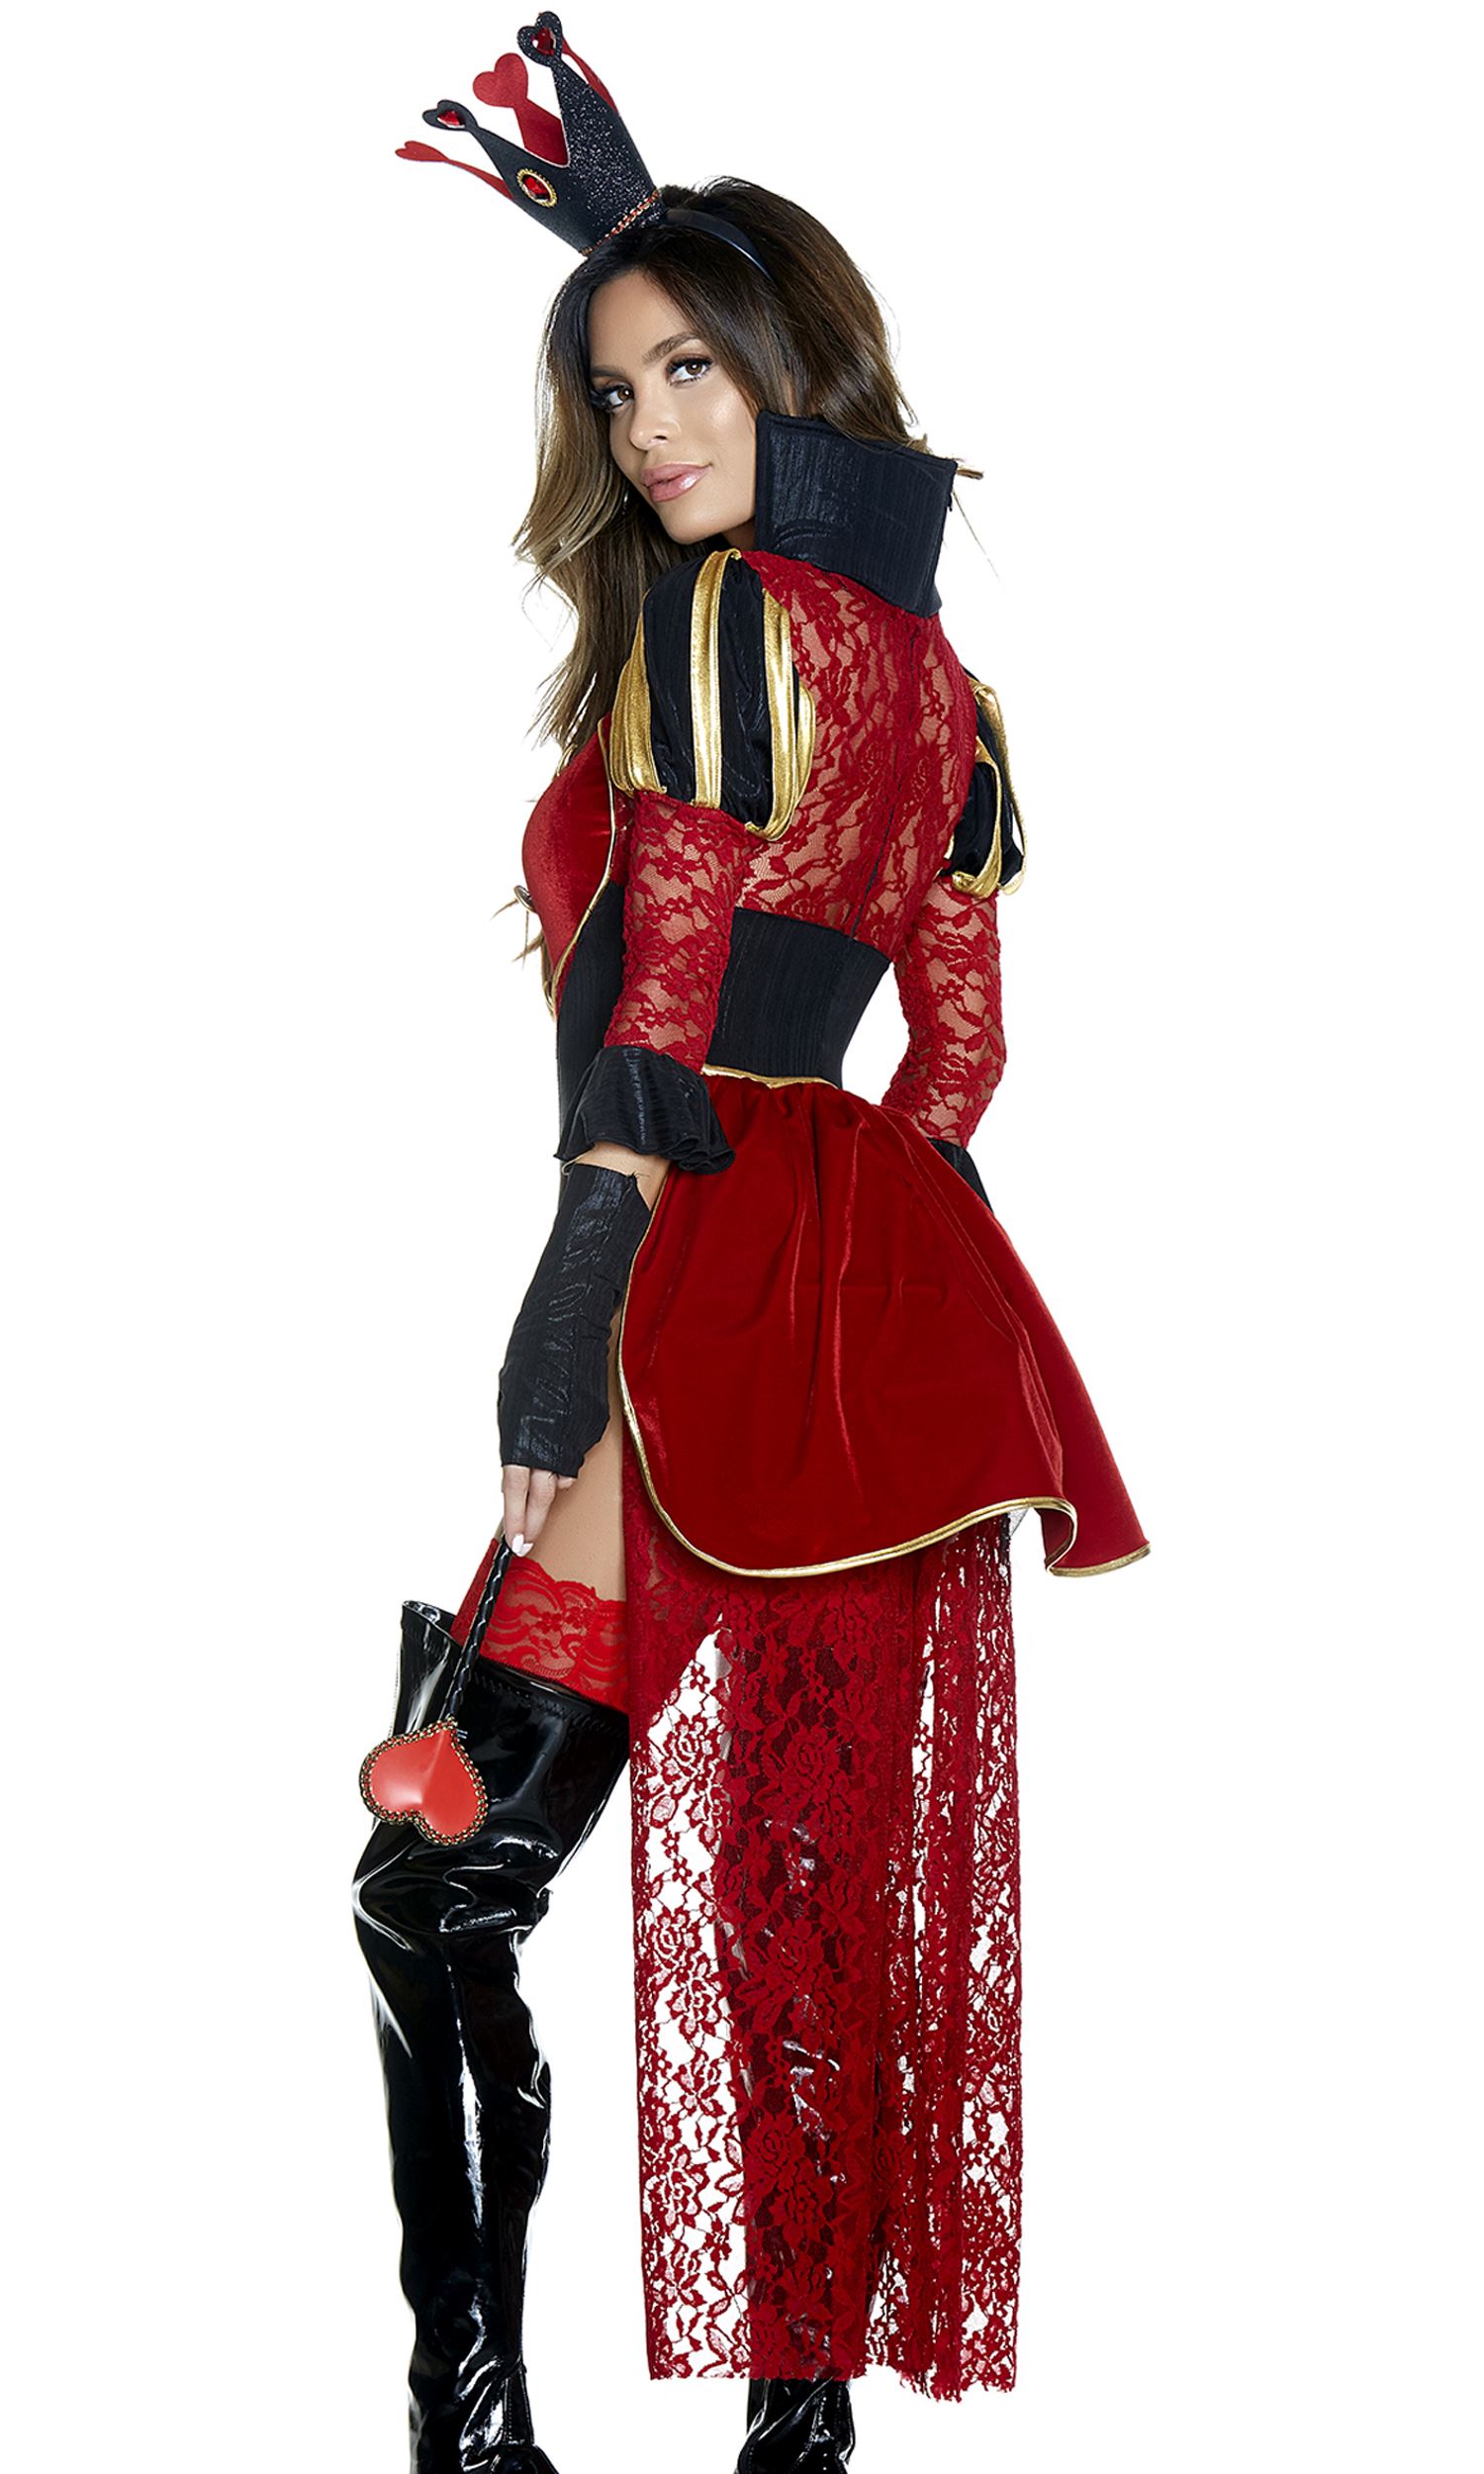 Adult Royal Queen Woman Costume  $93.99  The Costume Land